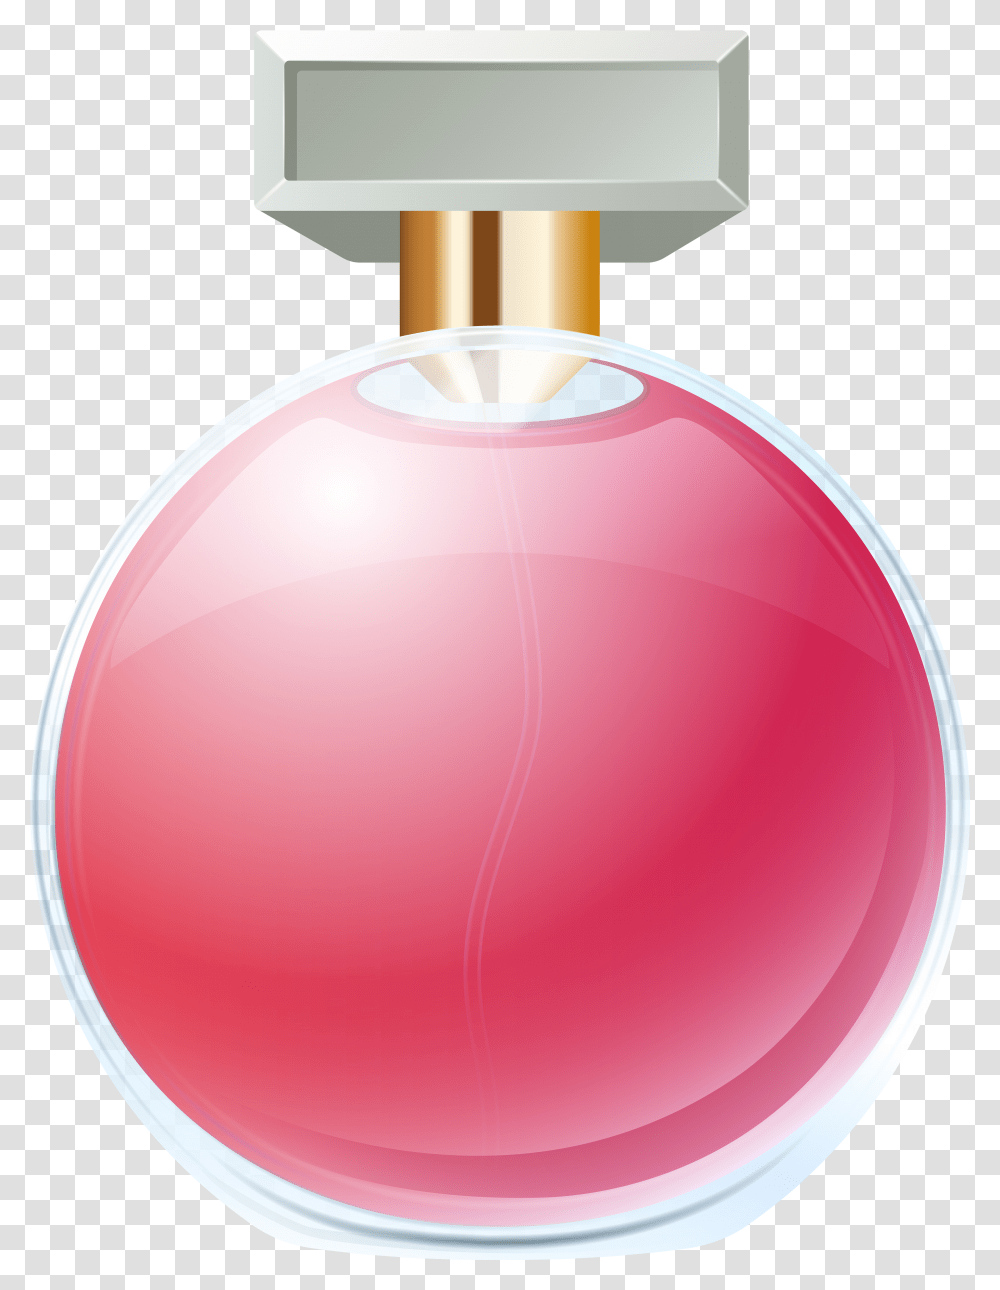 Clip Art Cosmetic Backgrounds Perfume Bottle Background, Lamp, Ornament, Sphere, Balloon Transparent Png